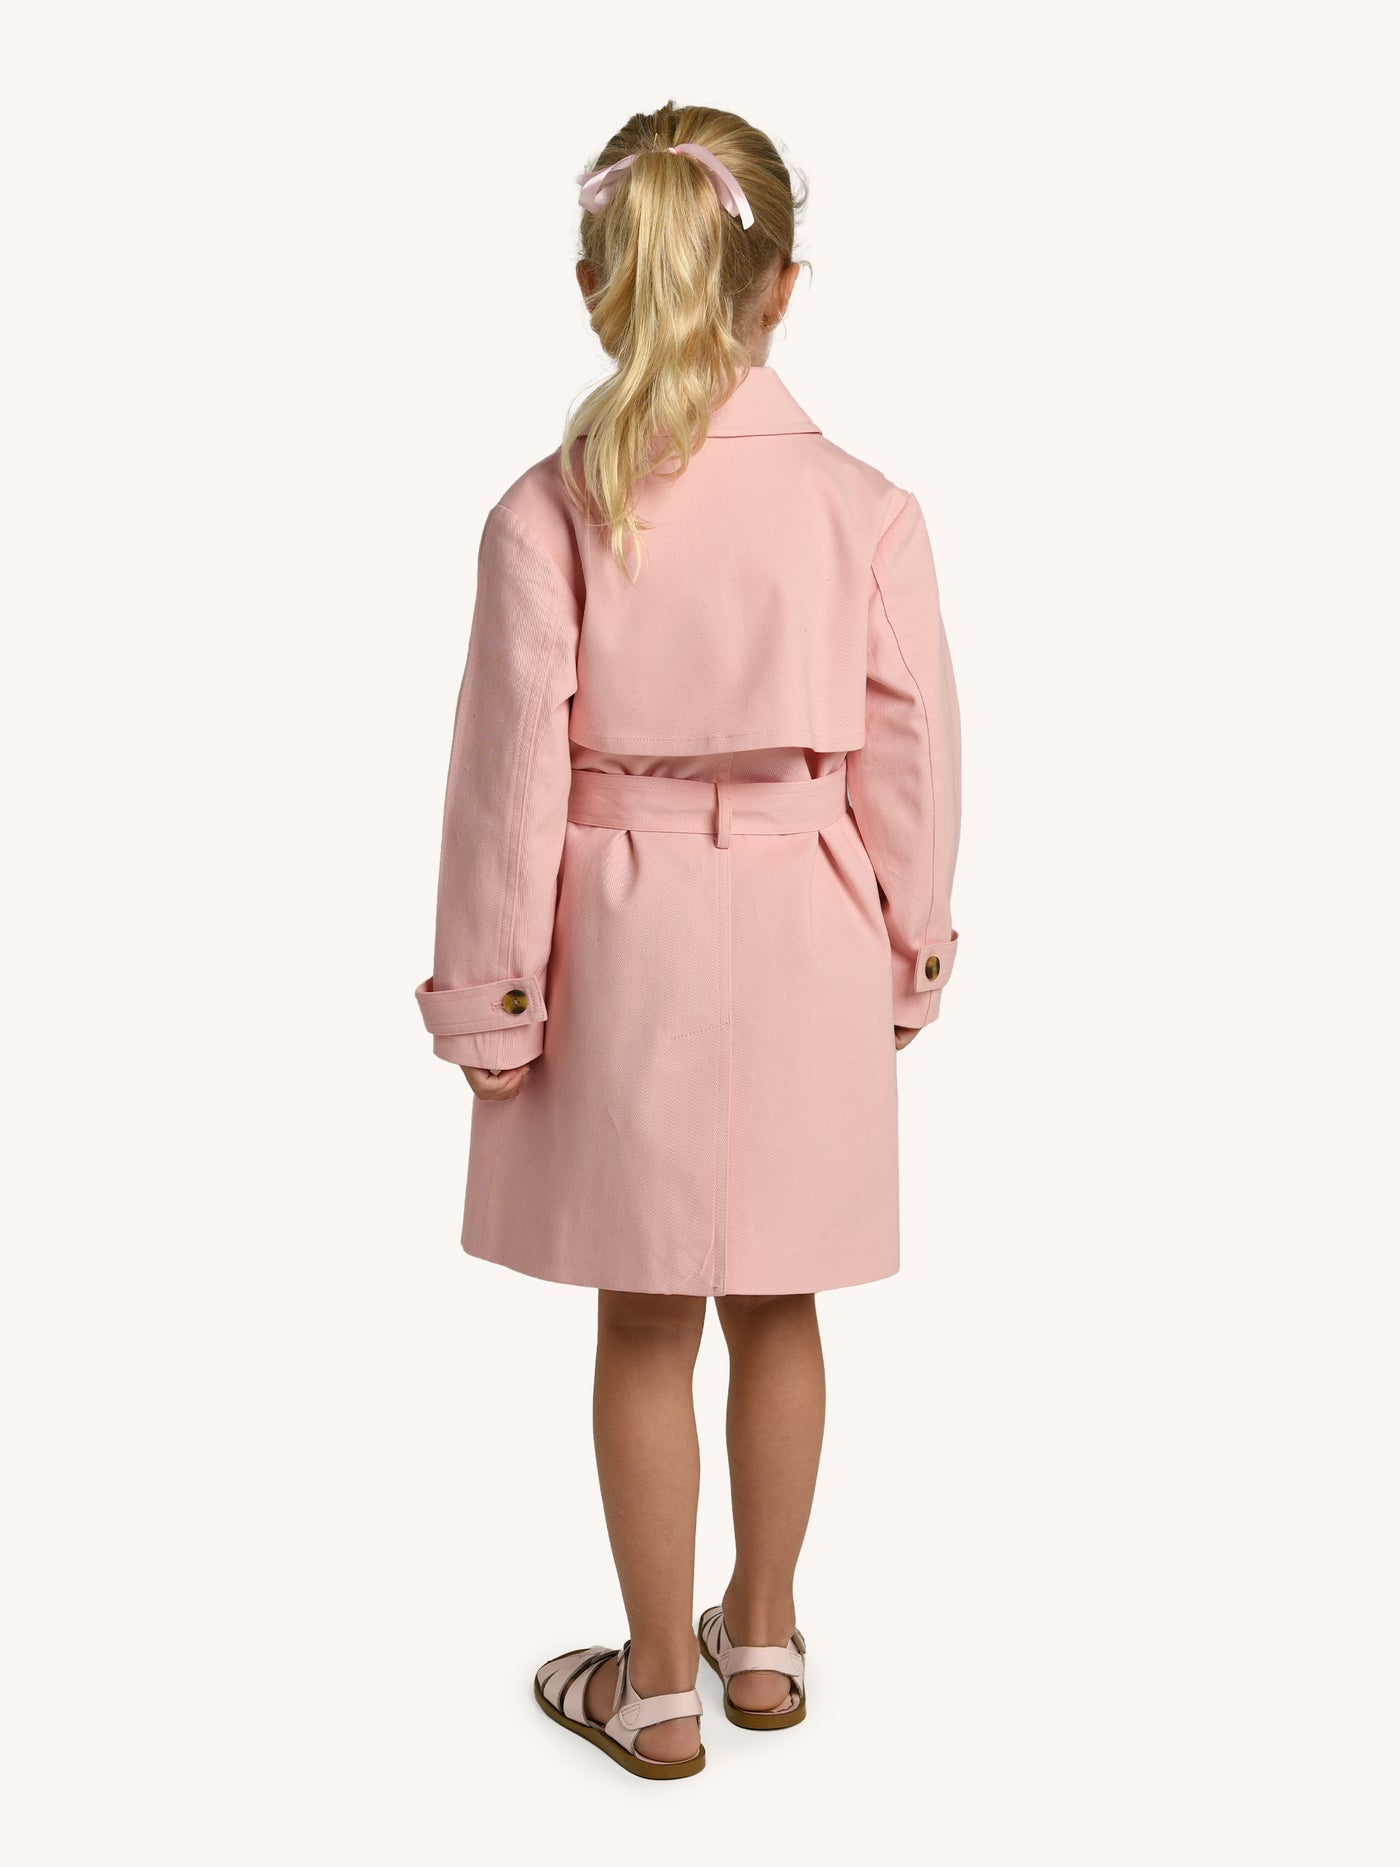 Double Breasted Coat-Pale Blush